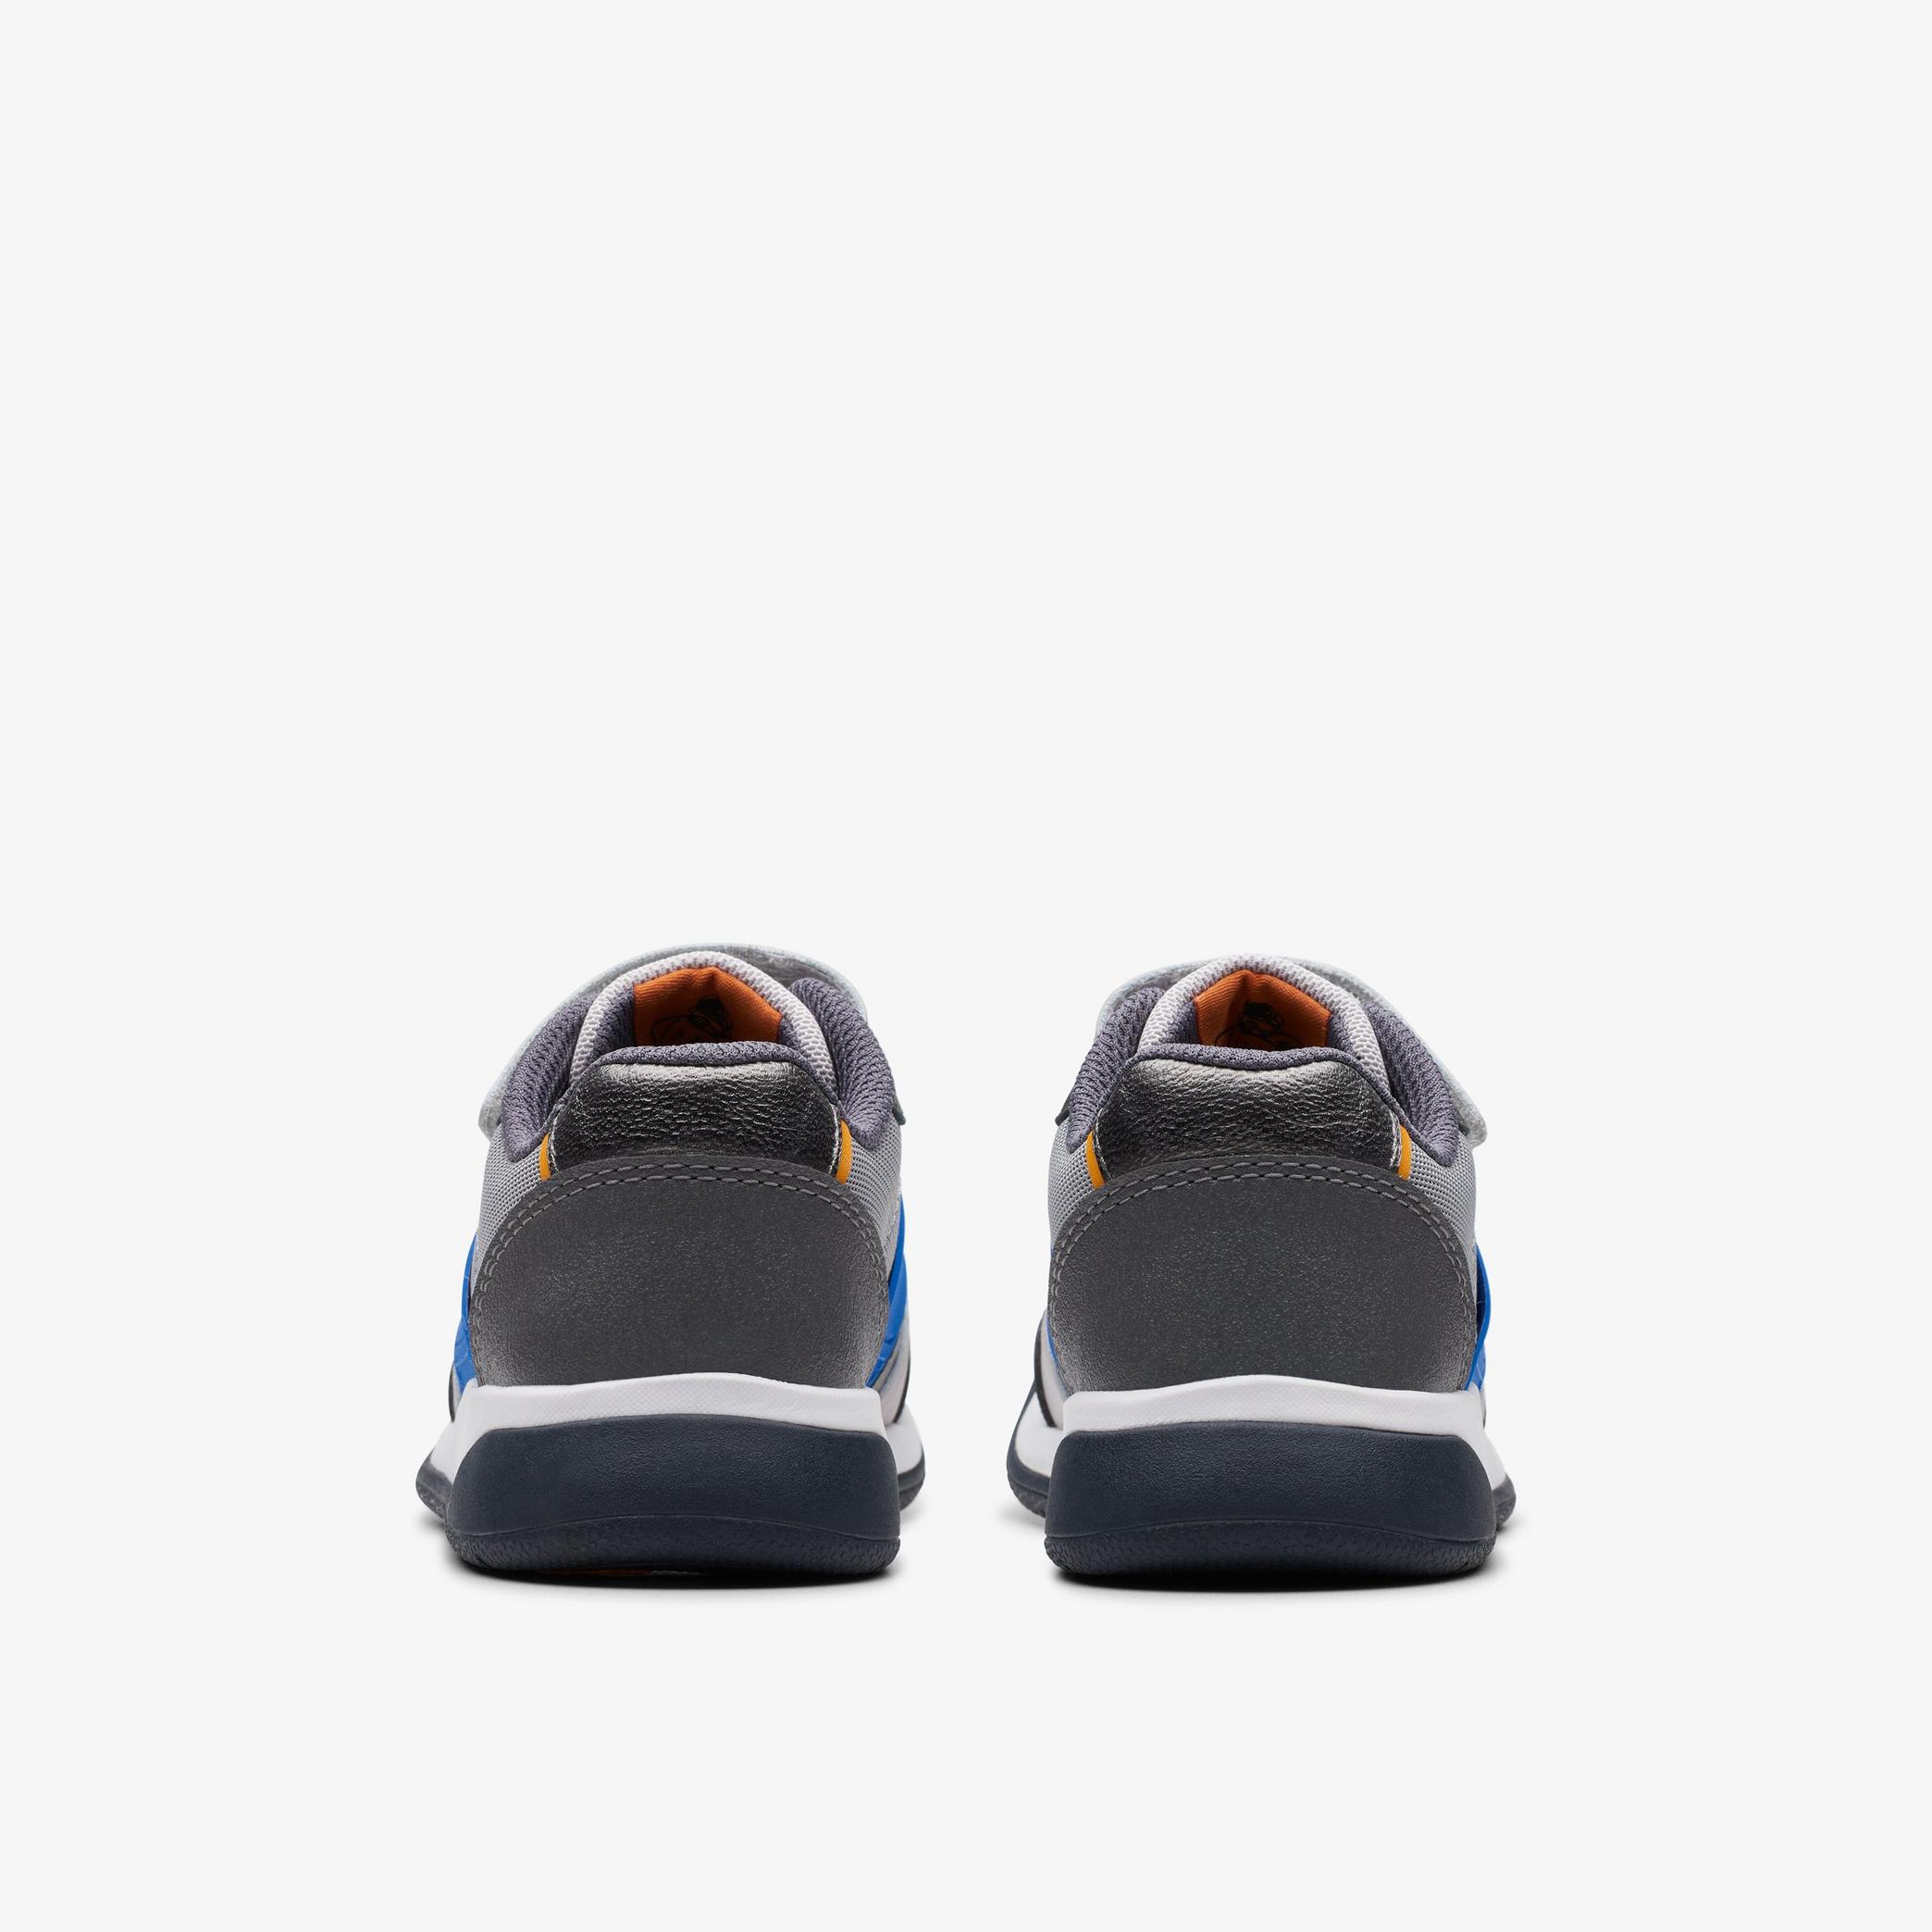 Lune Flex Kid Grey/Blue Trainers, view 5 of 7